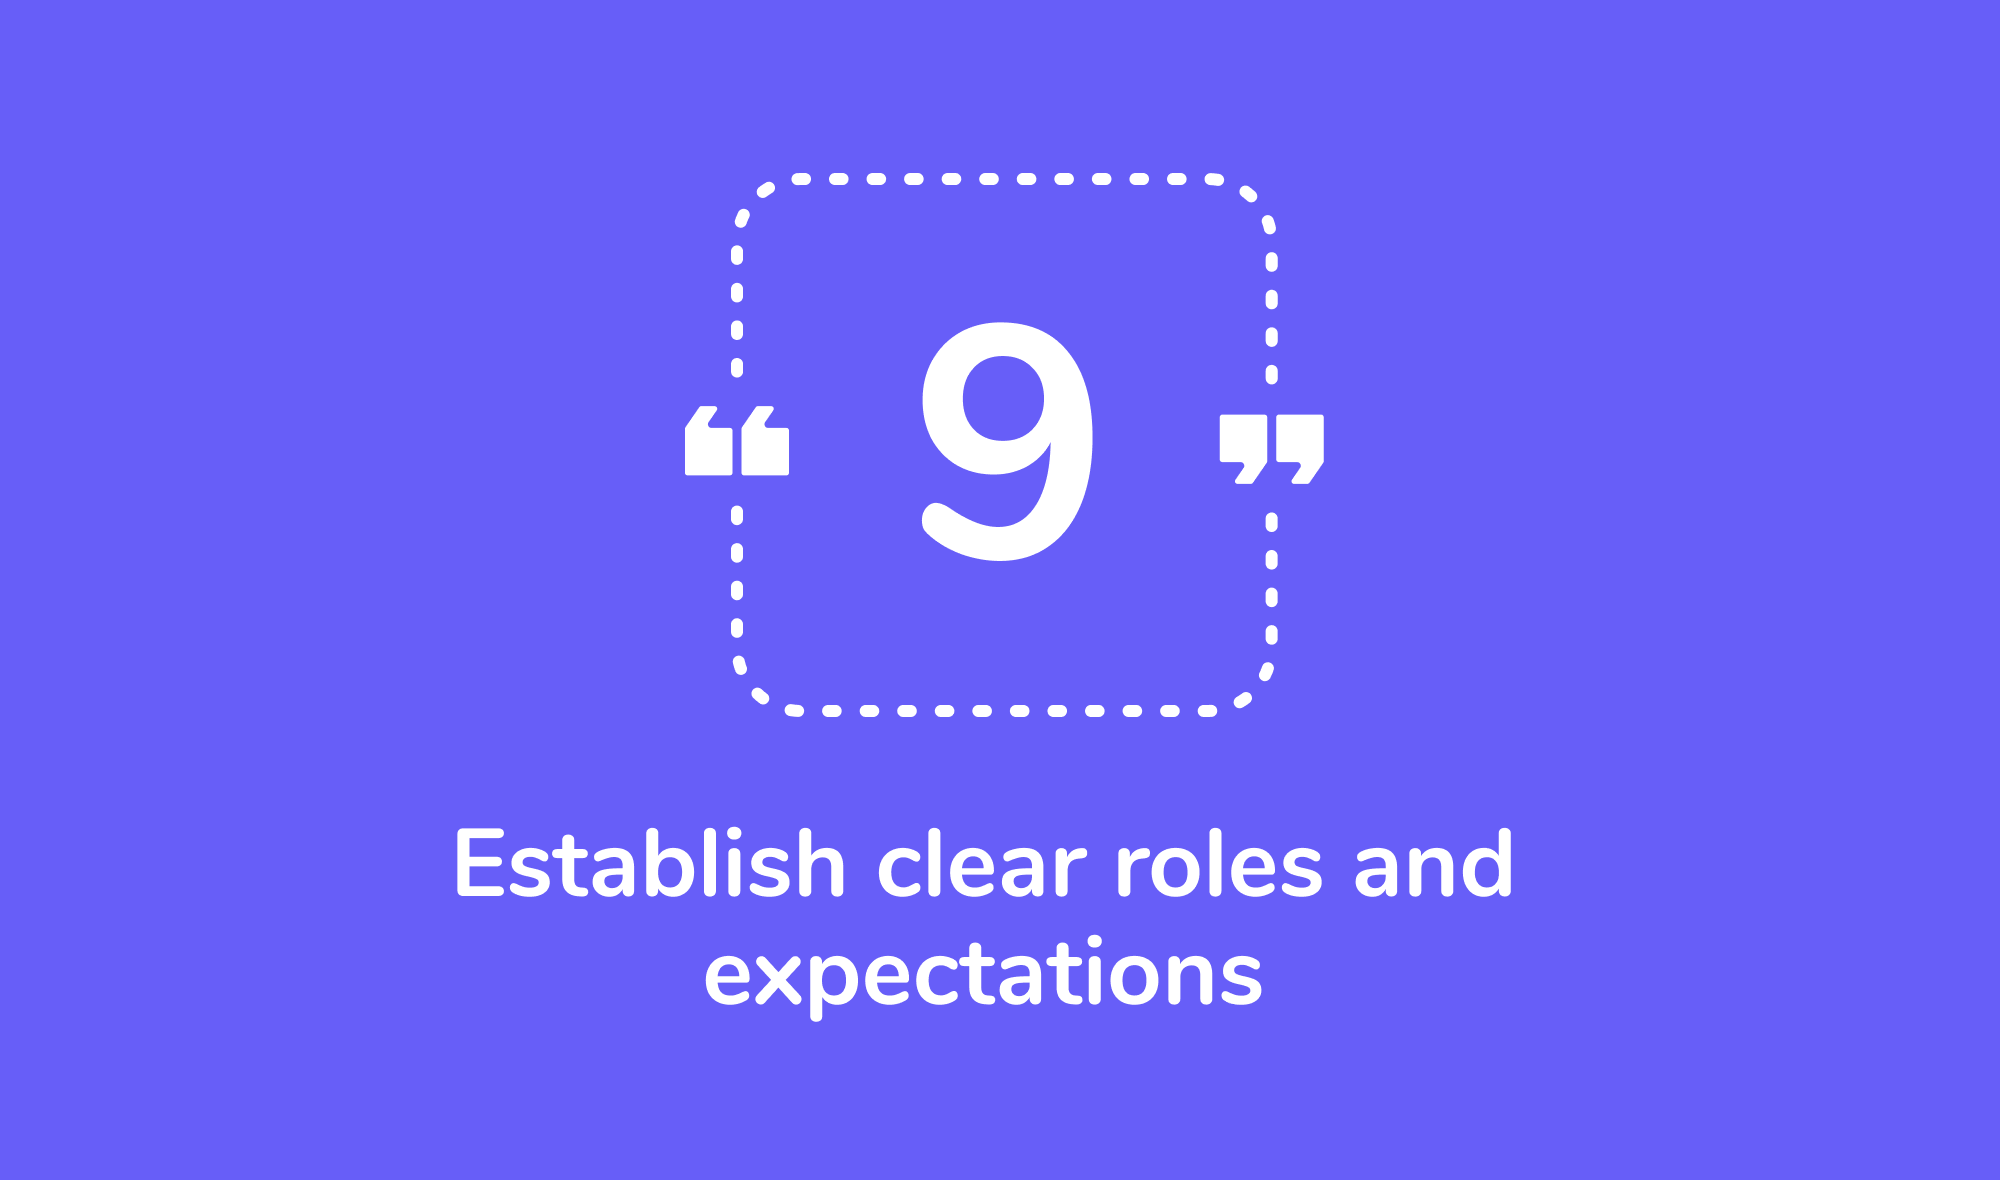 9. Establish clear roles and expectations